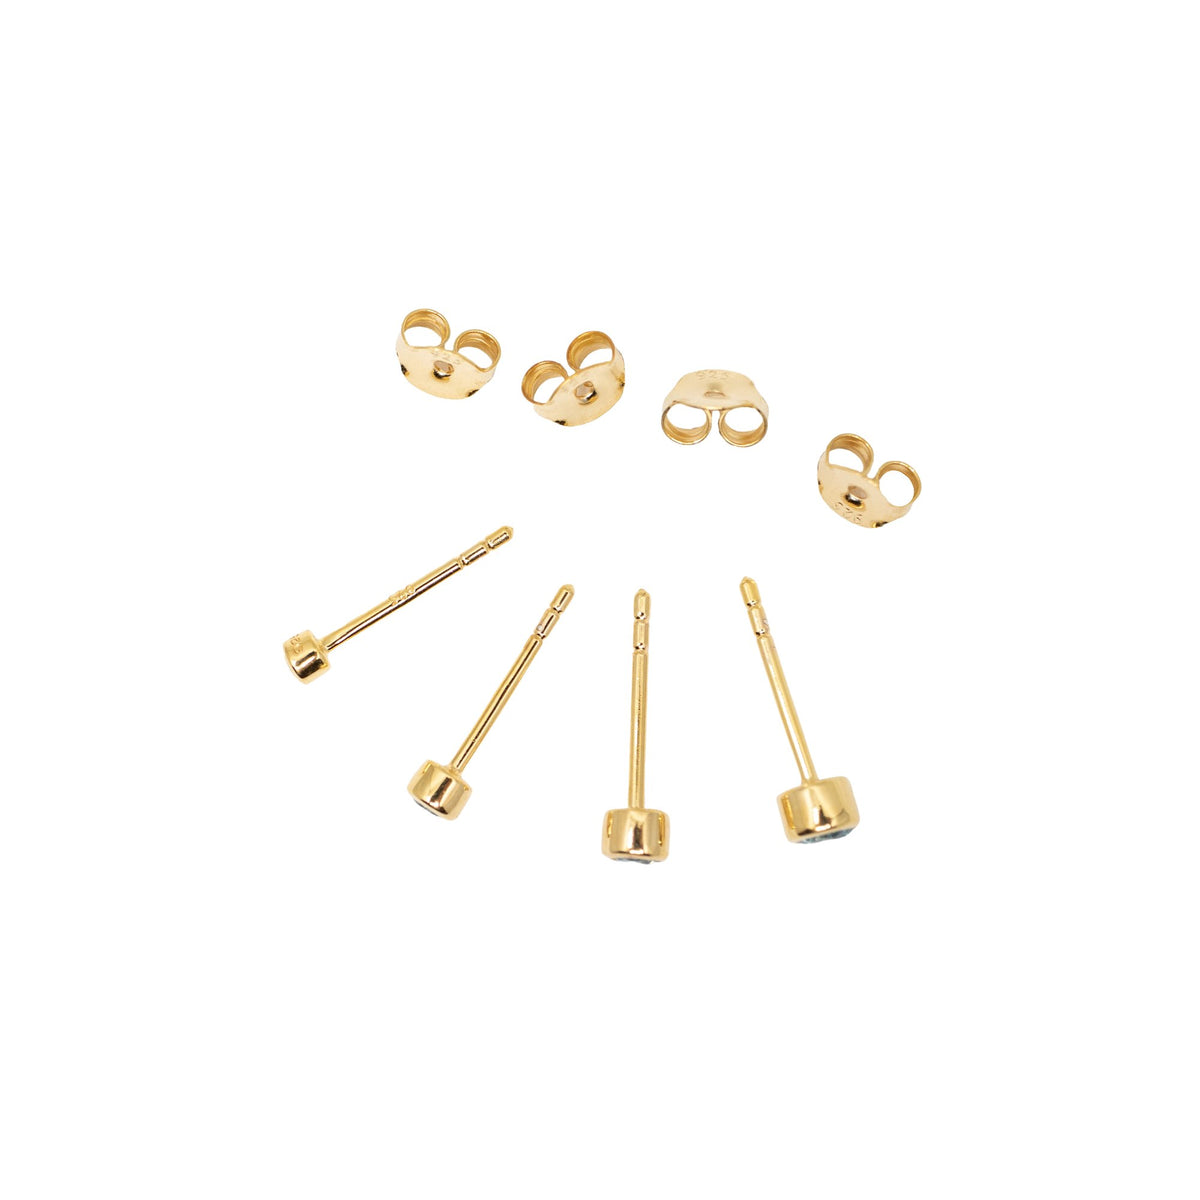 Yellow Gold Curated Earring Sets The Duchess Curated Set The Curated Lobeamethystbridgertonchain_dangle_earring